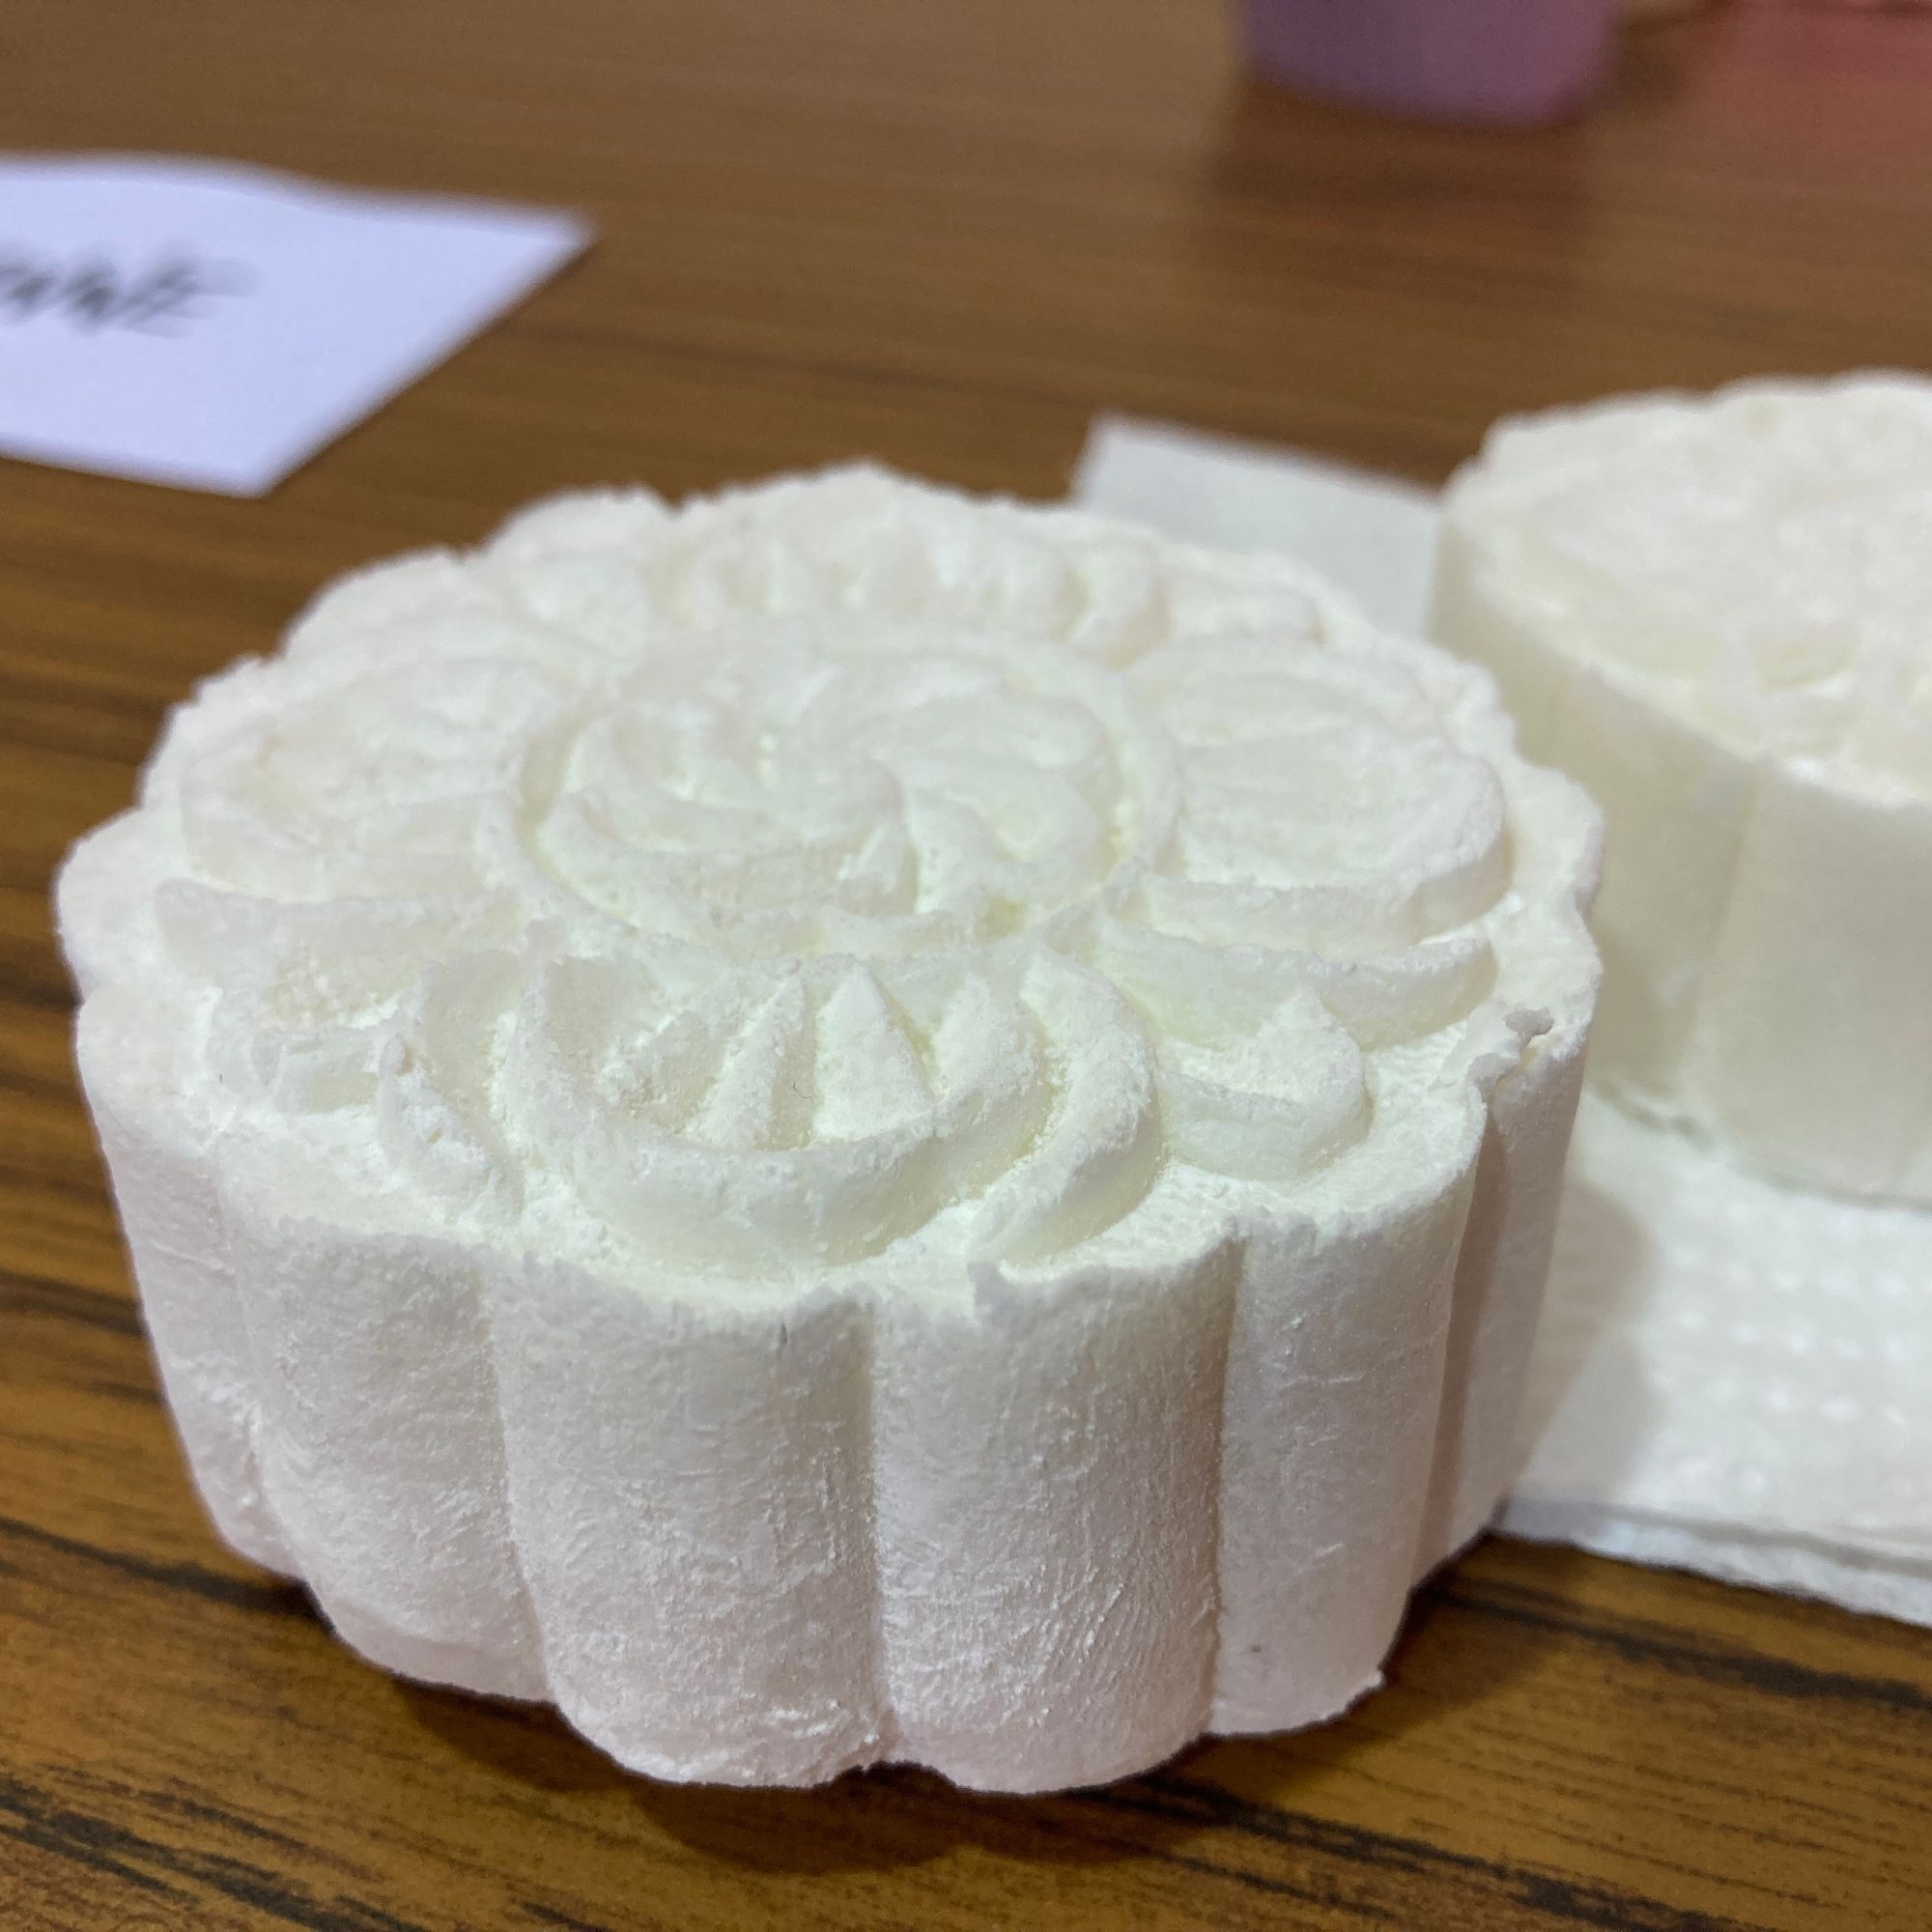 Skincare and Haircare Products Workshop - Shampoo Bar